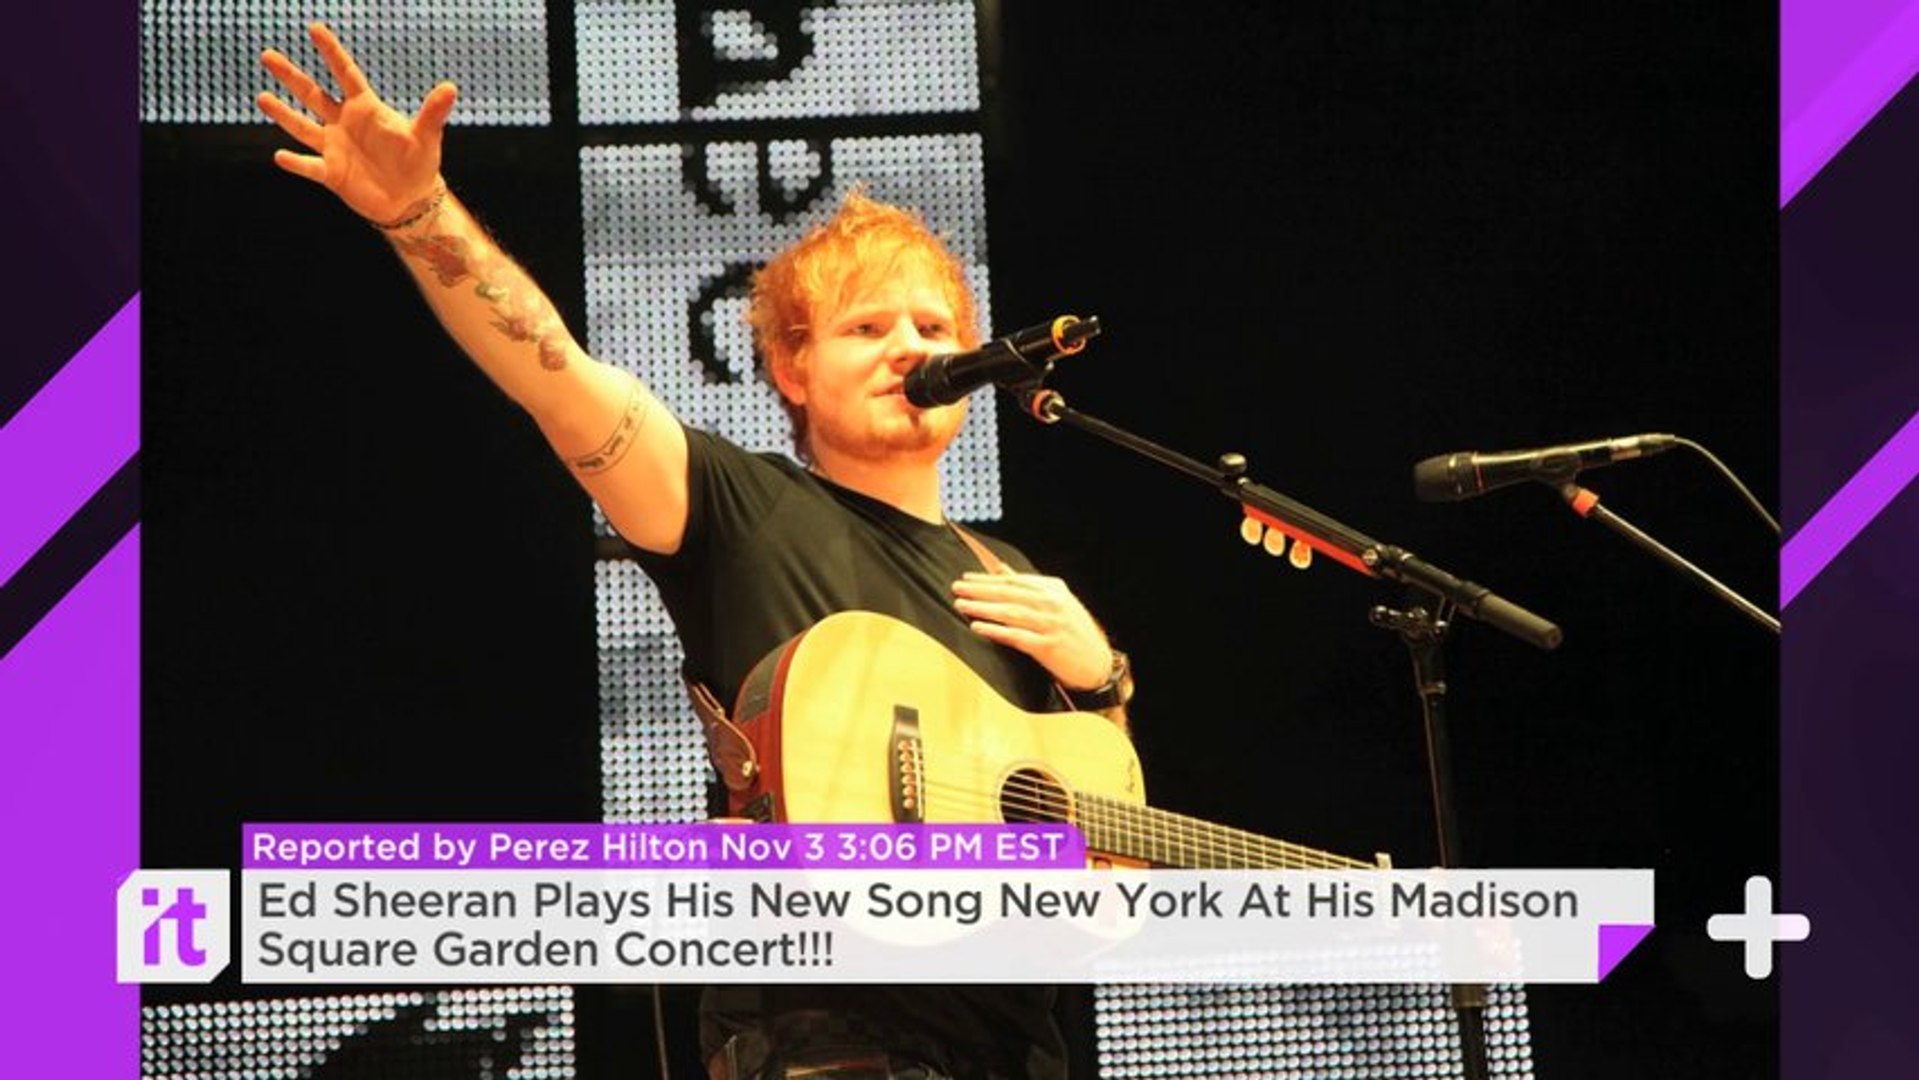 Ed Sheeran Plays His New Song New York At His Madison Square Garden Concert!!!